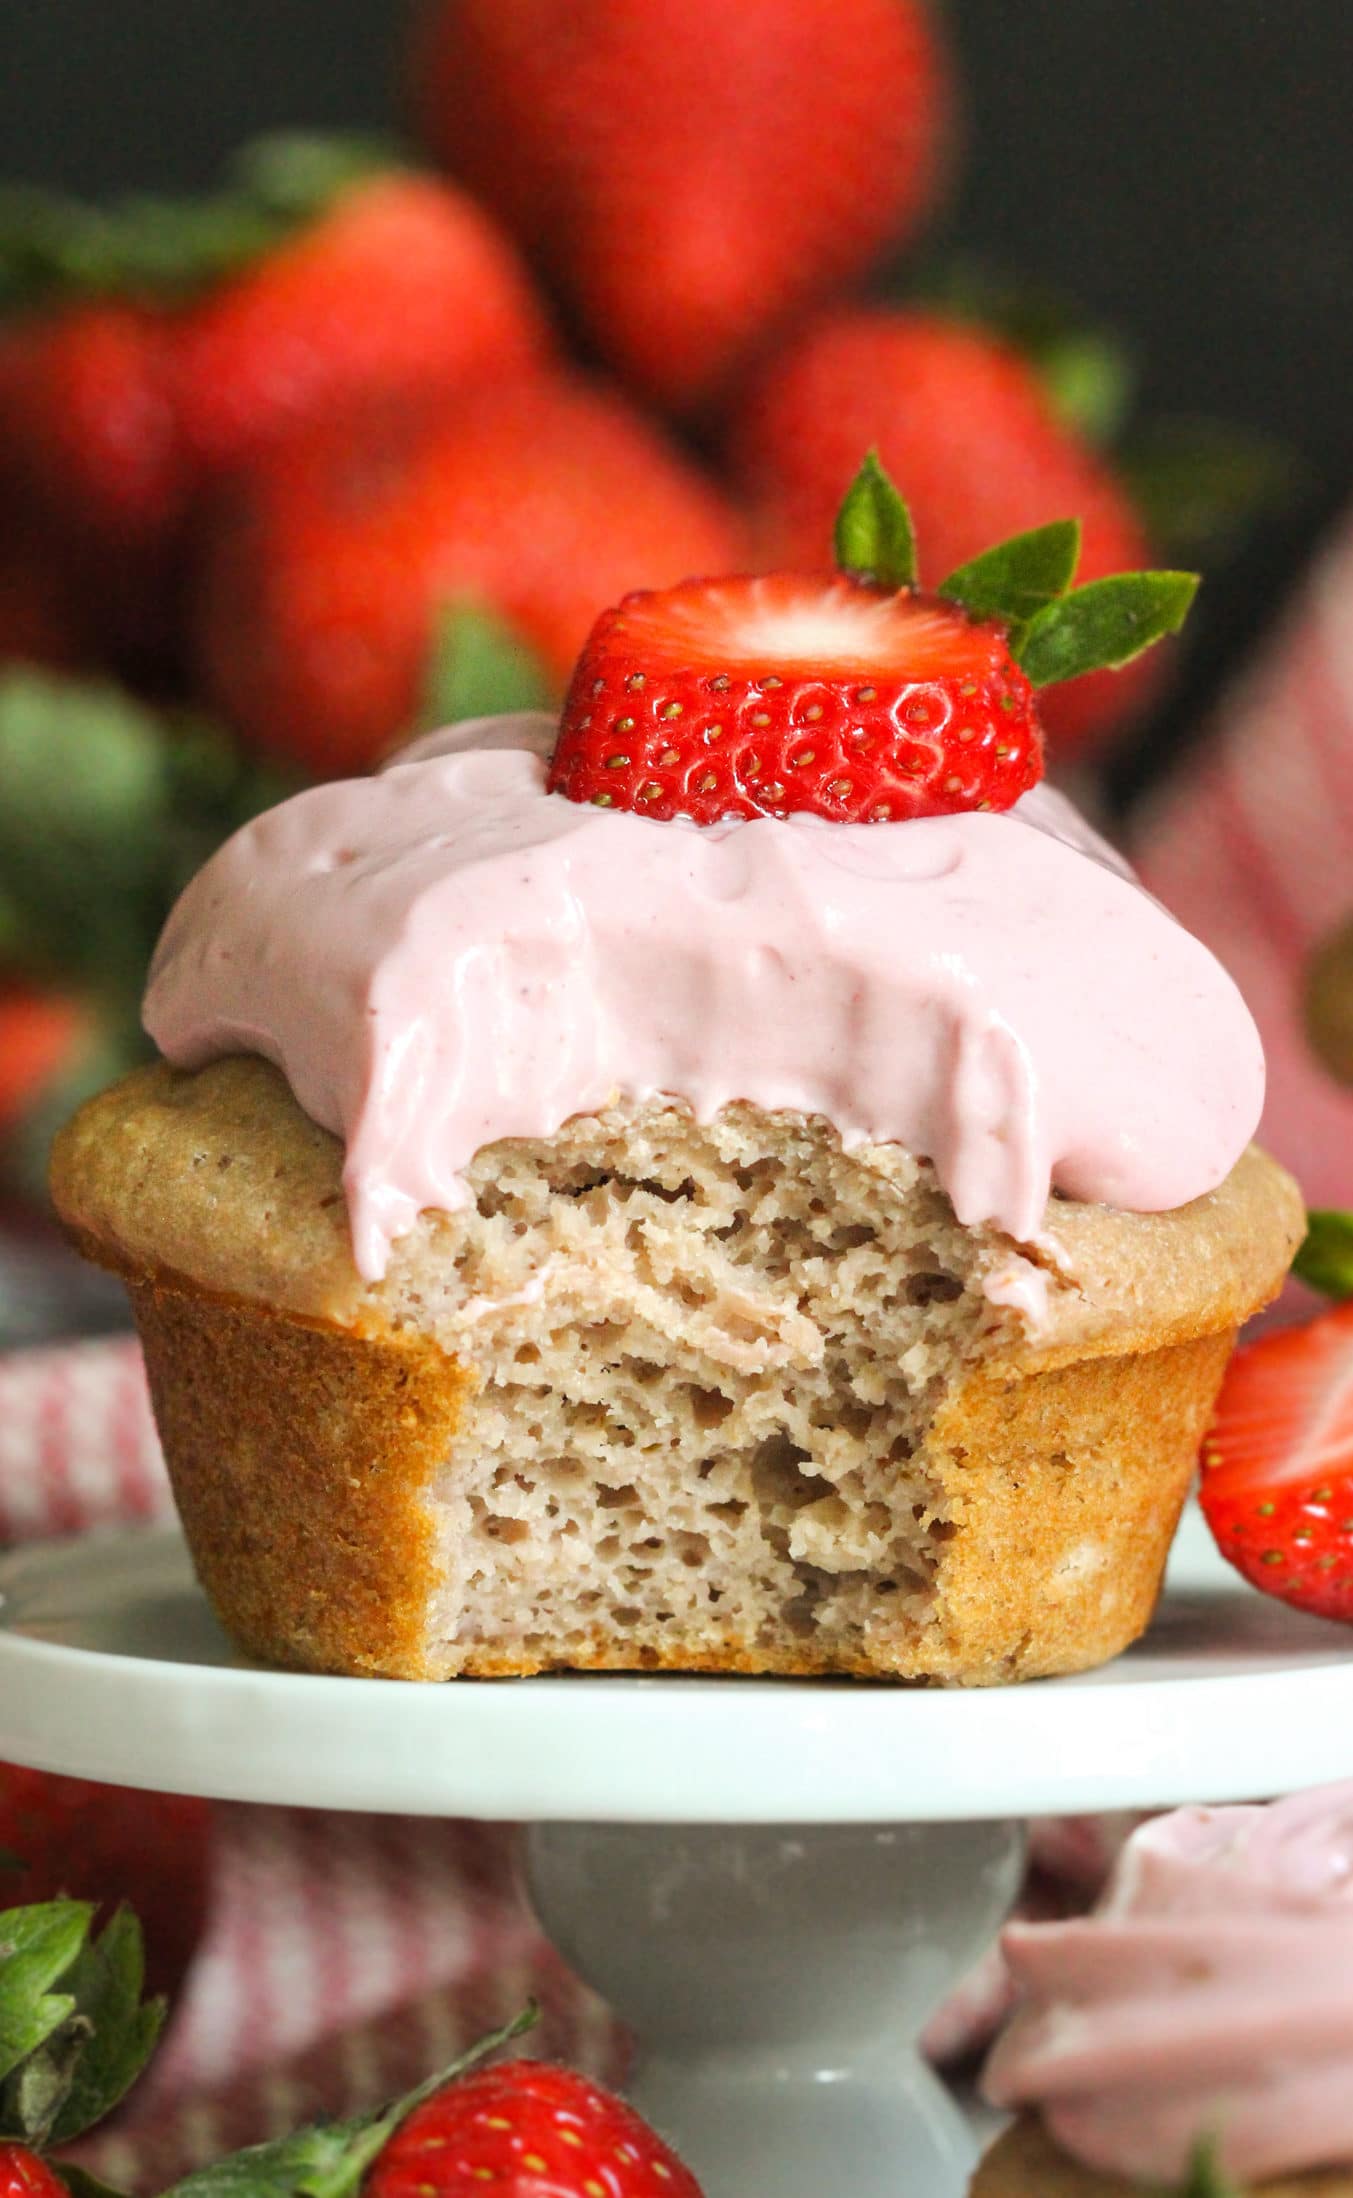 Healthy Strawberry Cupcakes with Strawberry Frosting (refined sugar free, low fat, high protein) - Healthy Dessert Recipes at Desserts with Benefits